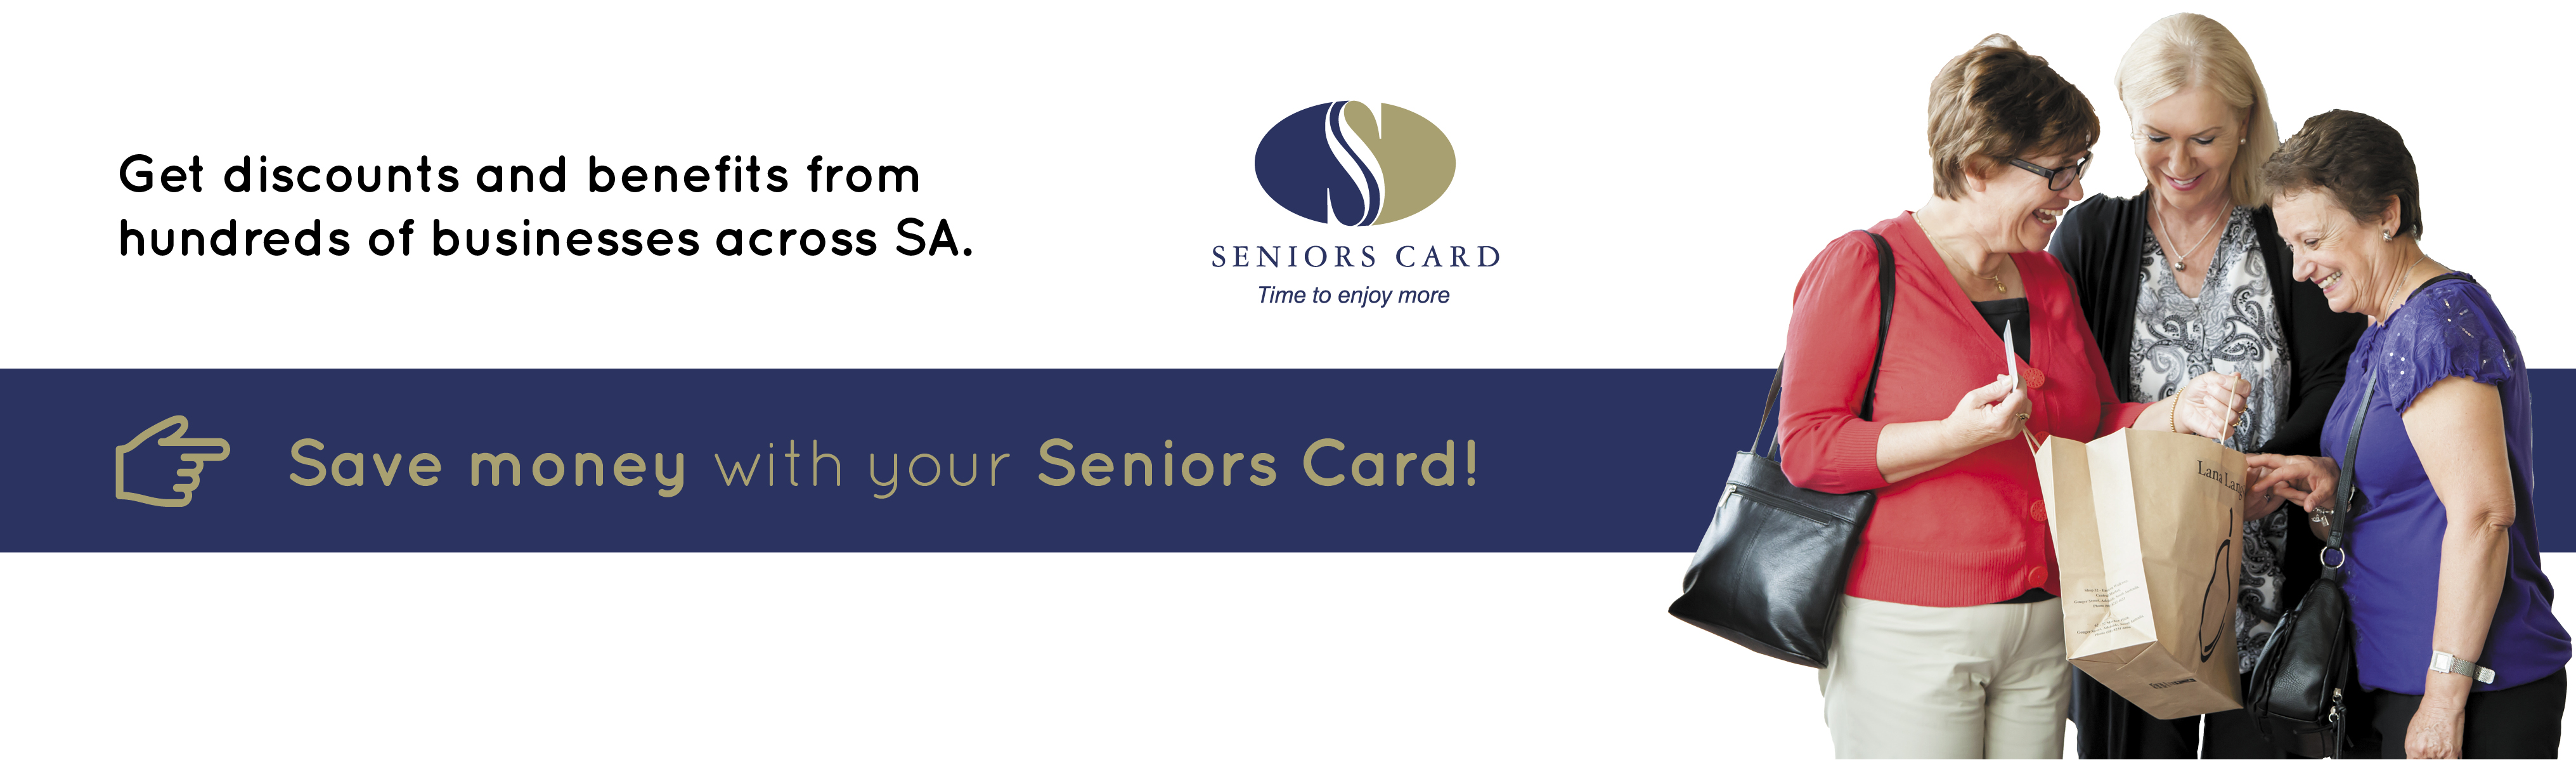 Save money with your Seniors Card!